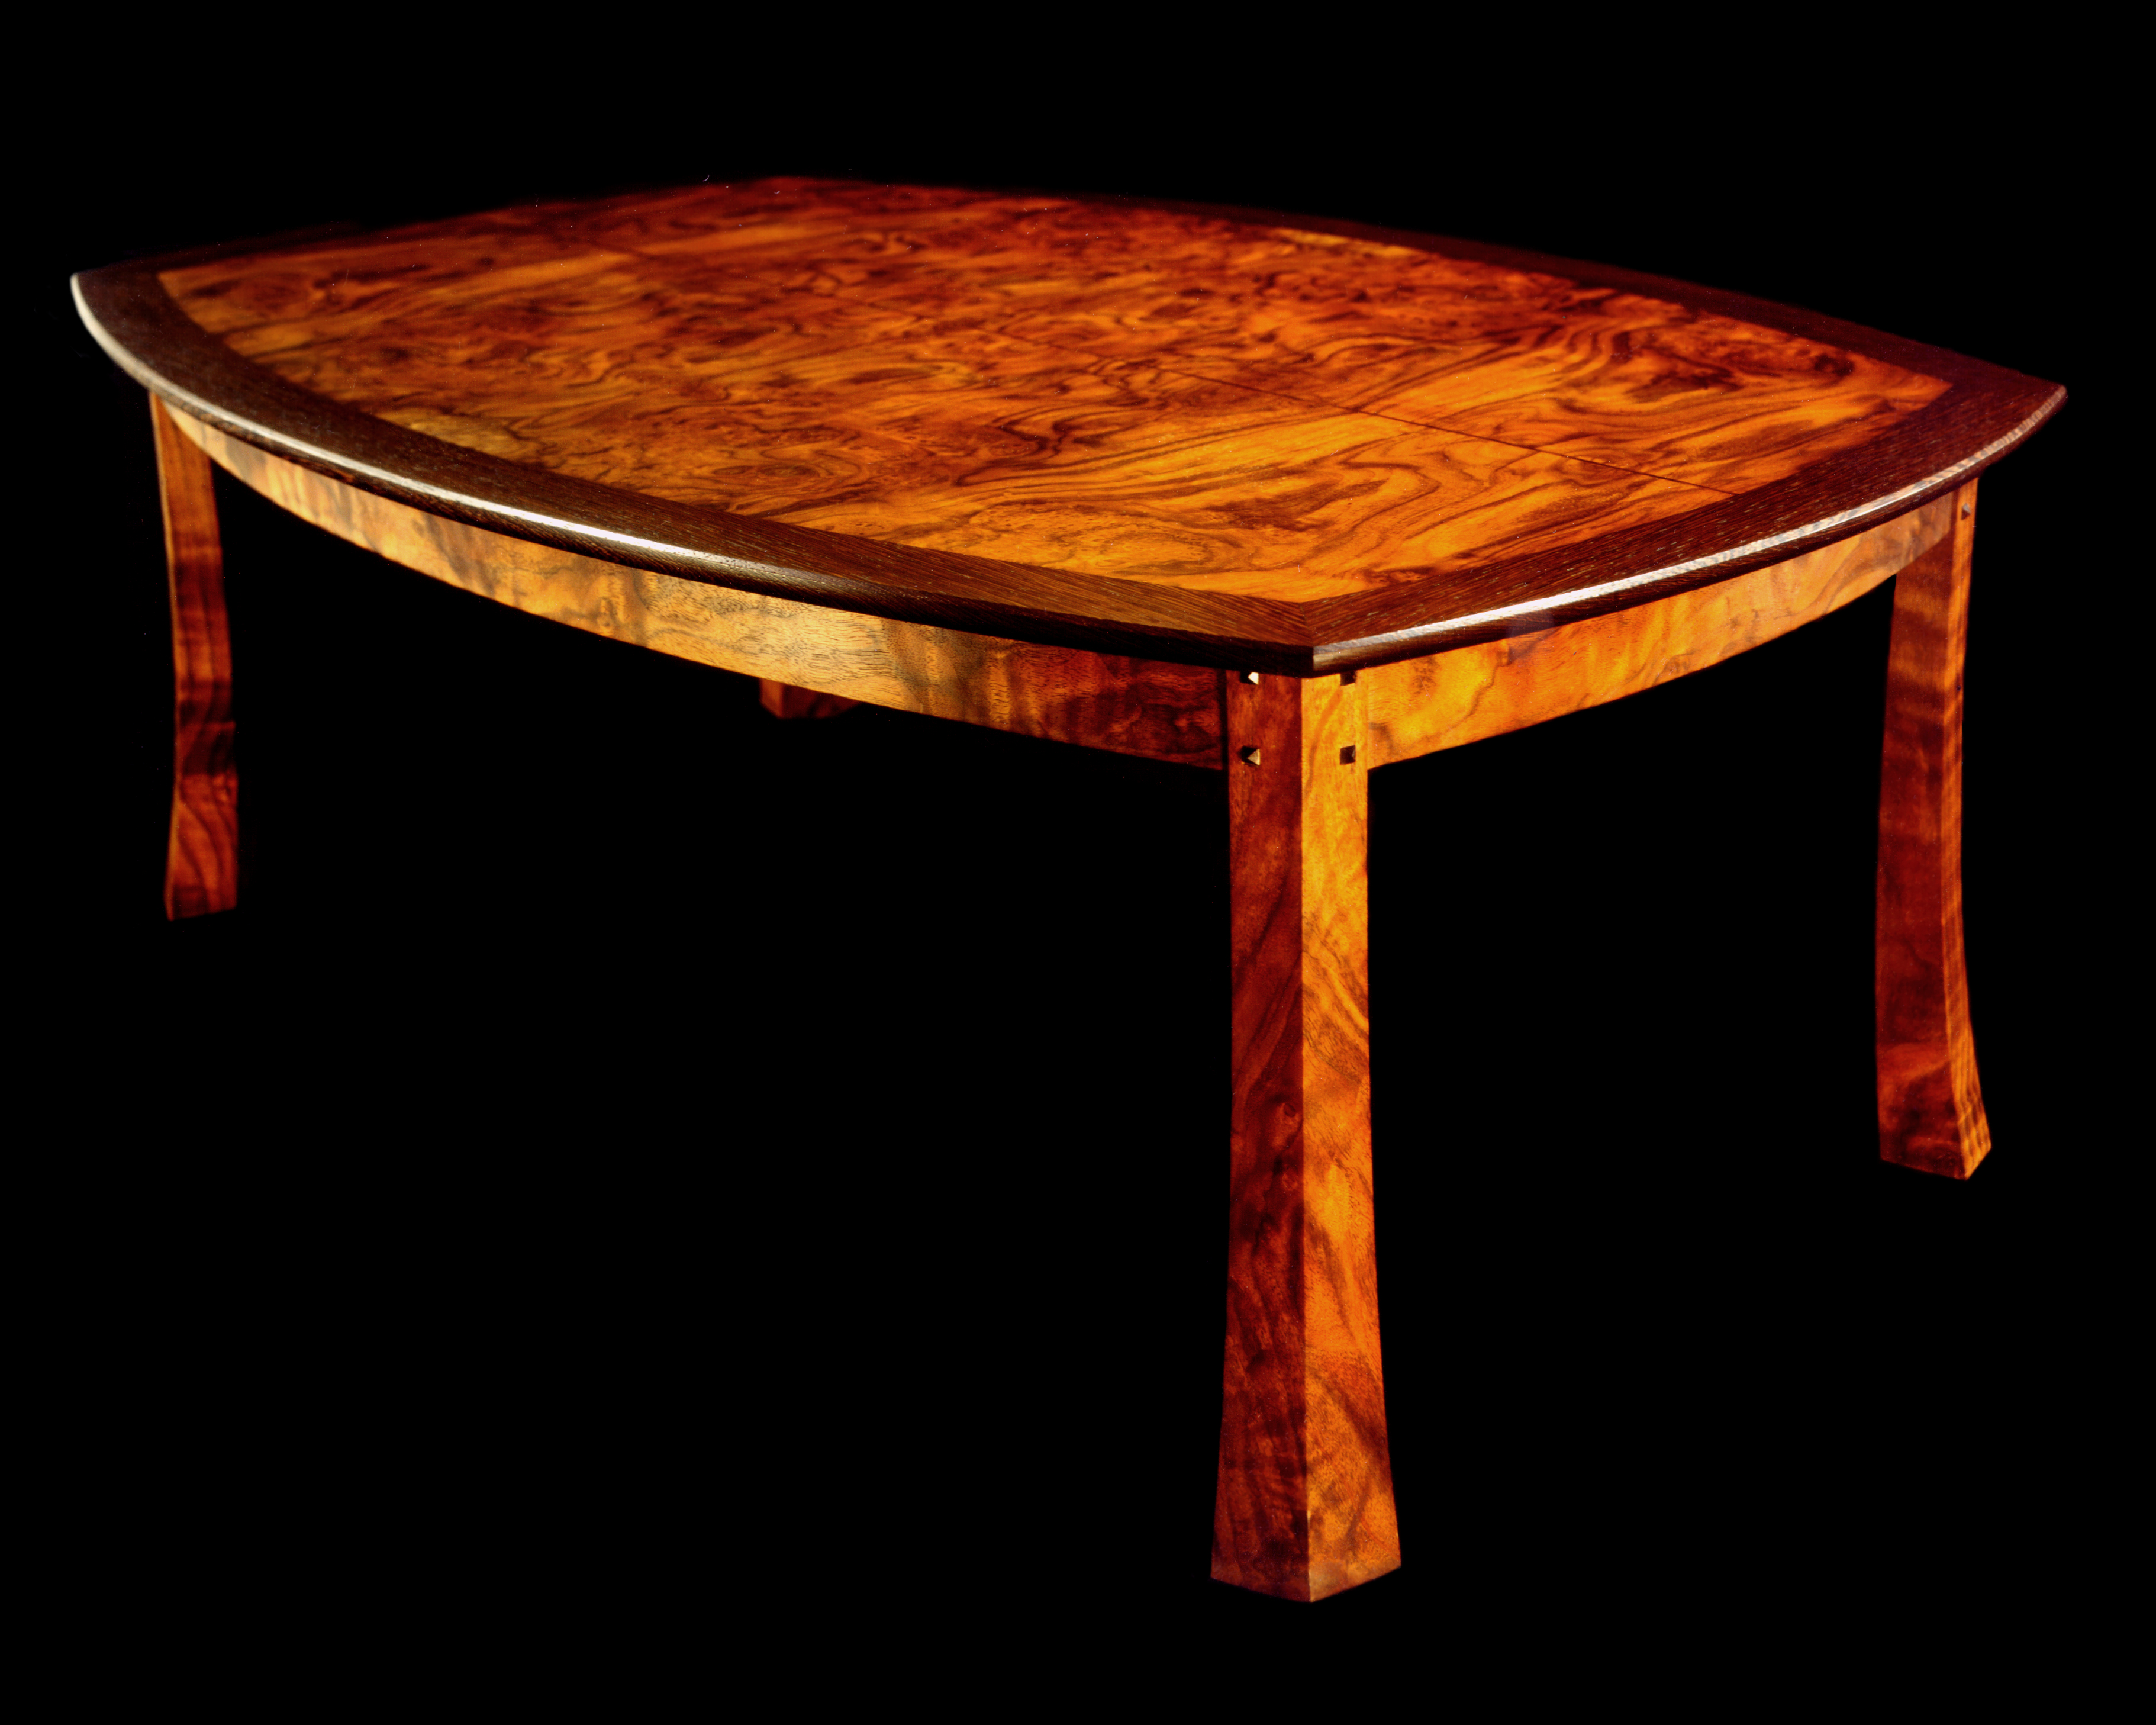 A Walnut Coffie Table With Flaired Legs